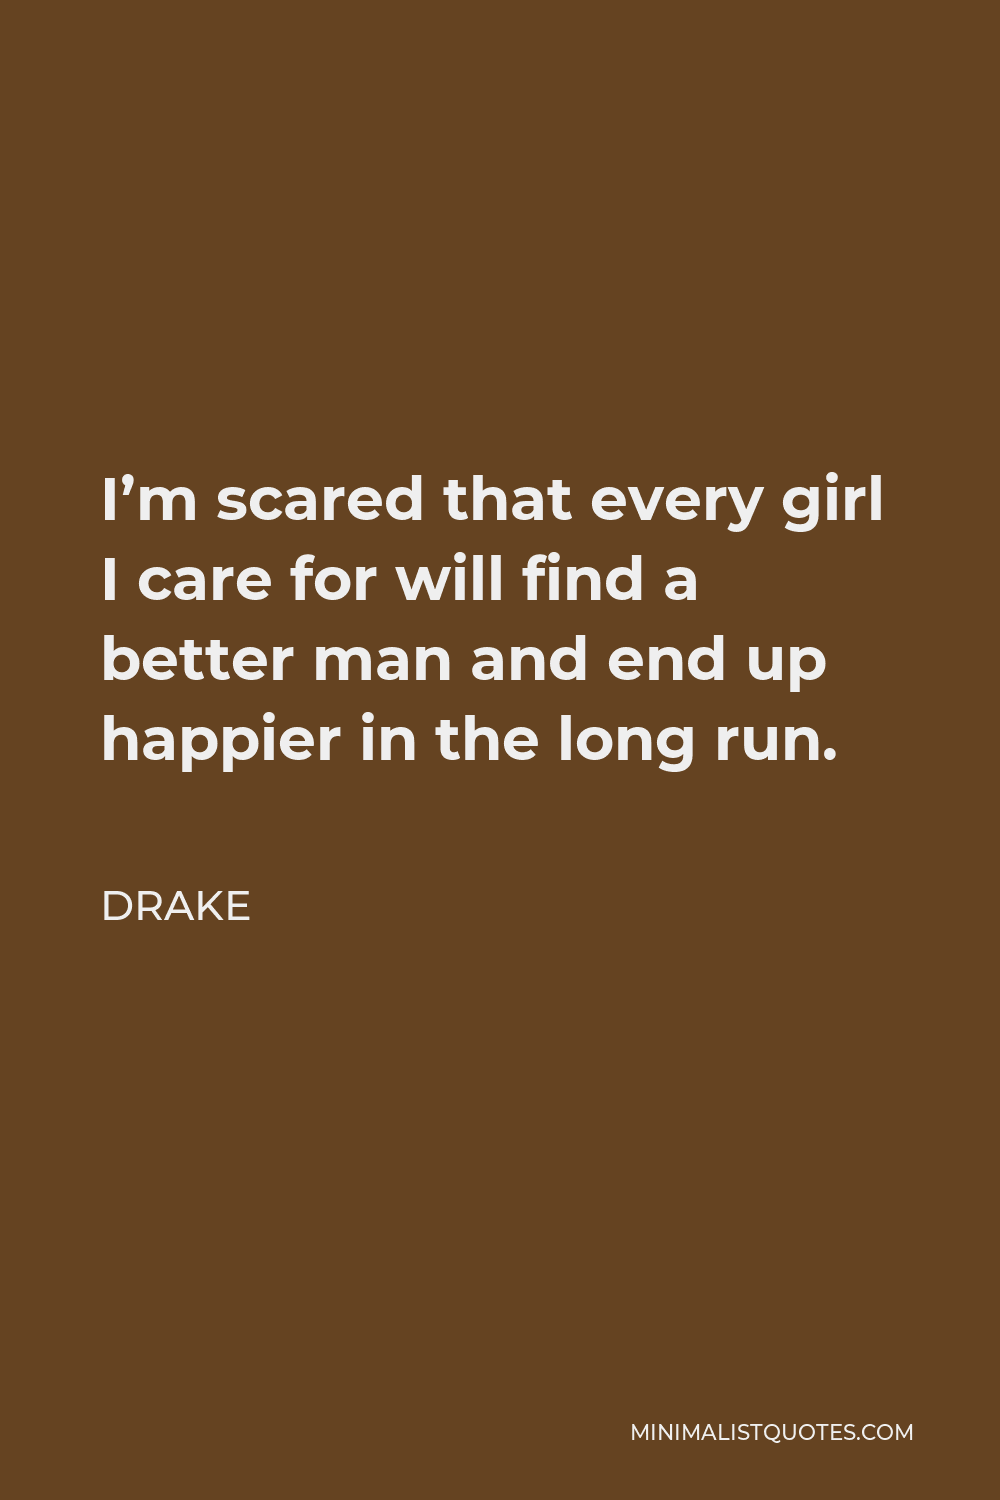 Drake Quote - I’m scared that every girl I care for will find a better man and end up happier in the long run.